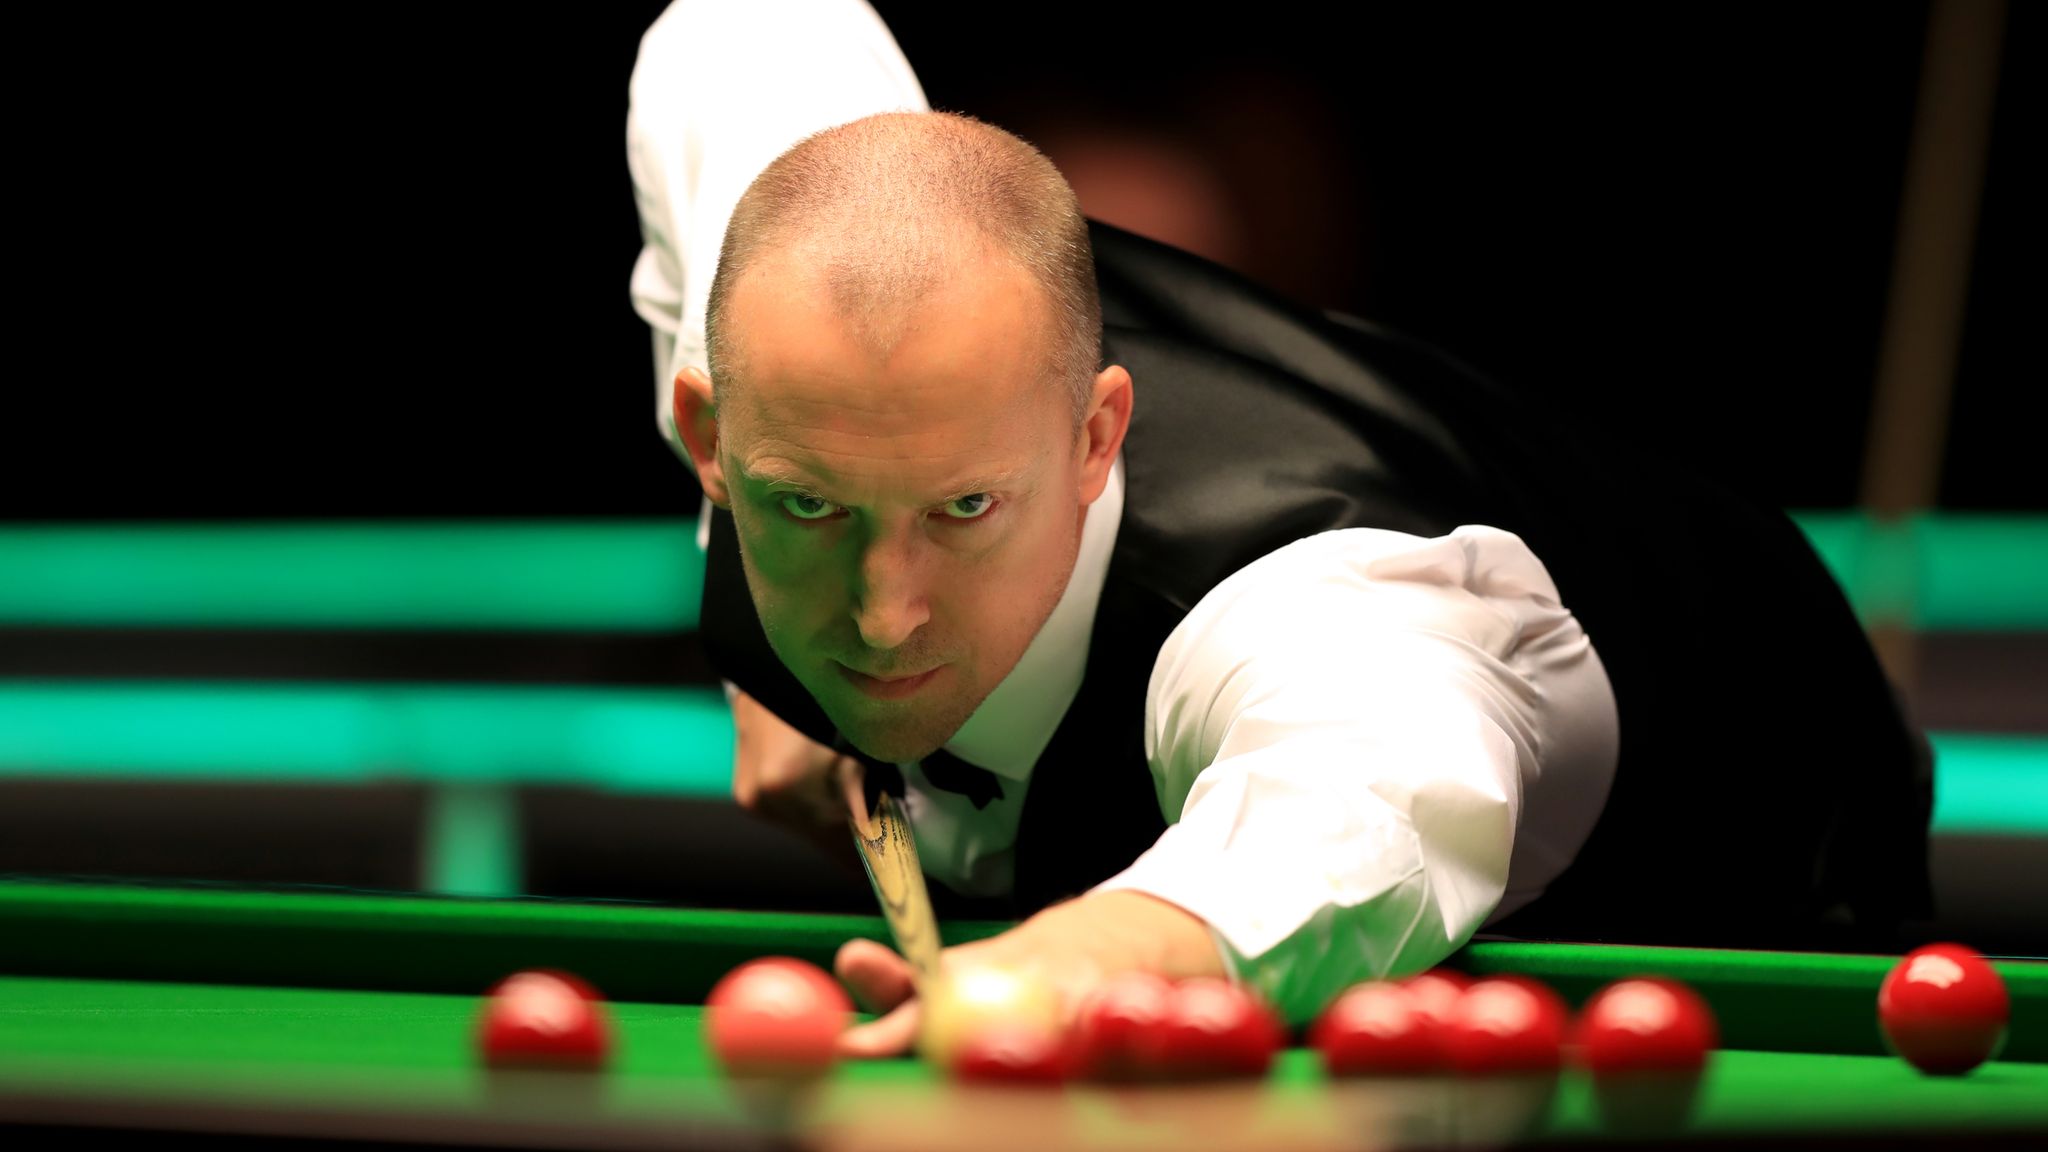 World Seniors Snooker Championship Jimmy White dethroned by David Lilley at Crucible Snooker News Sky Sports